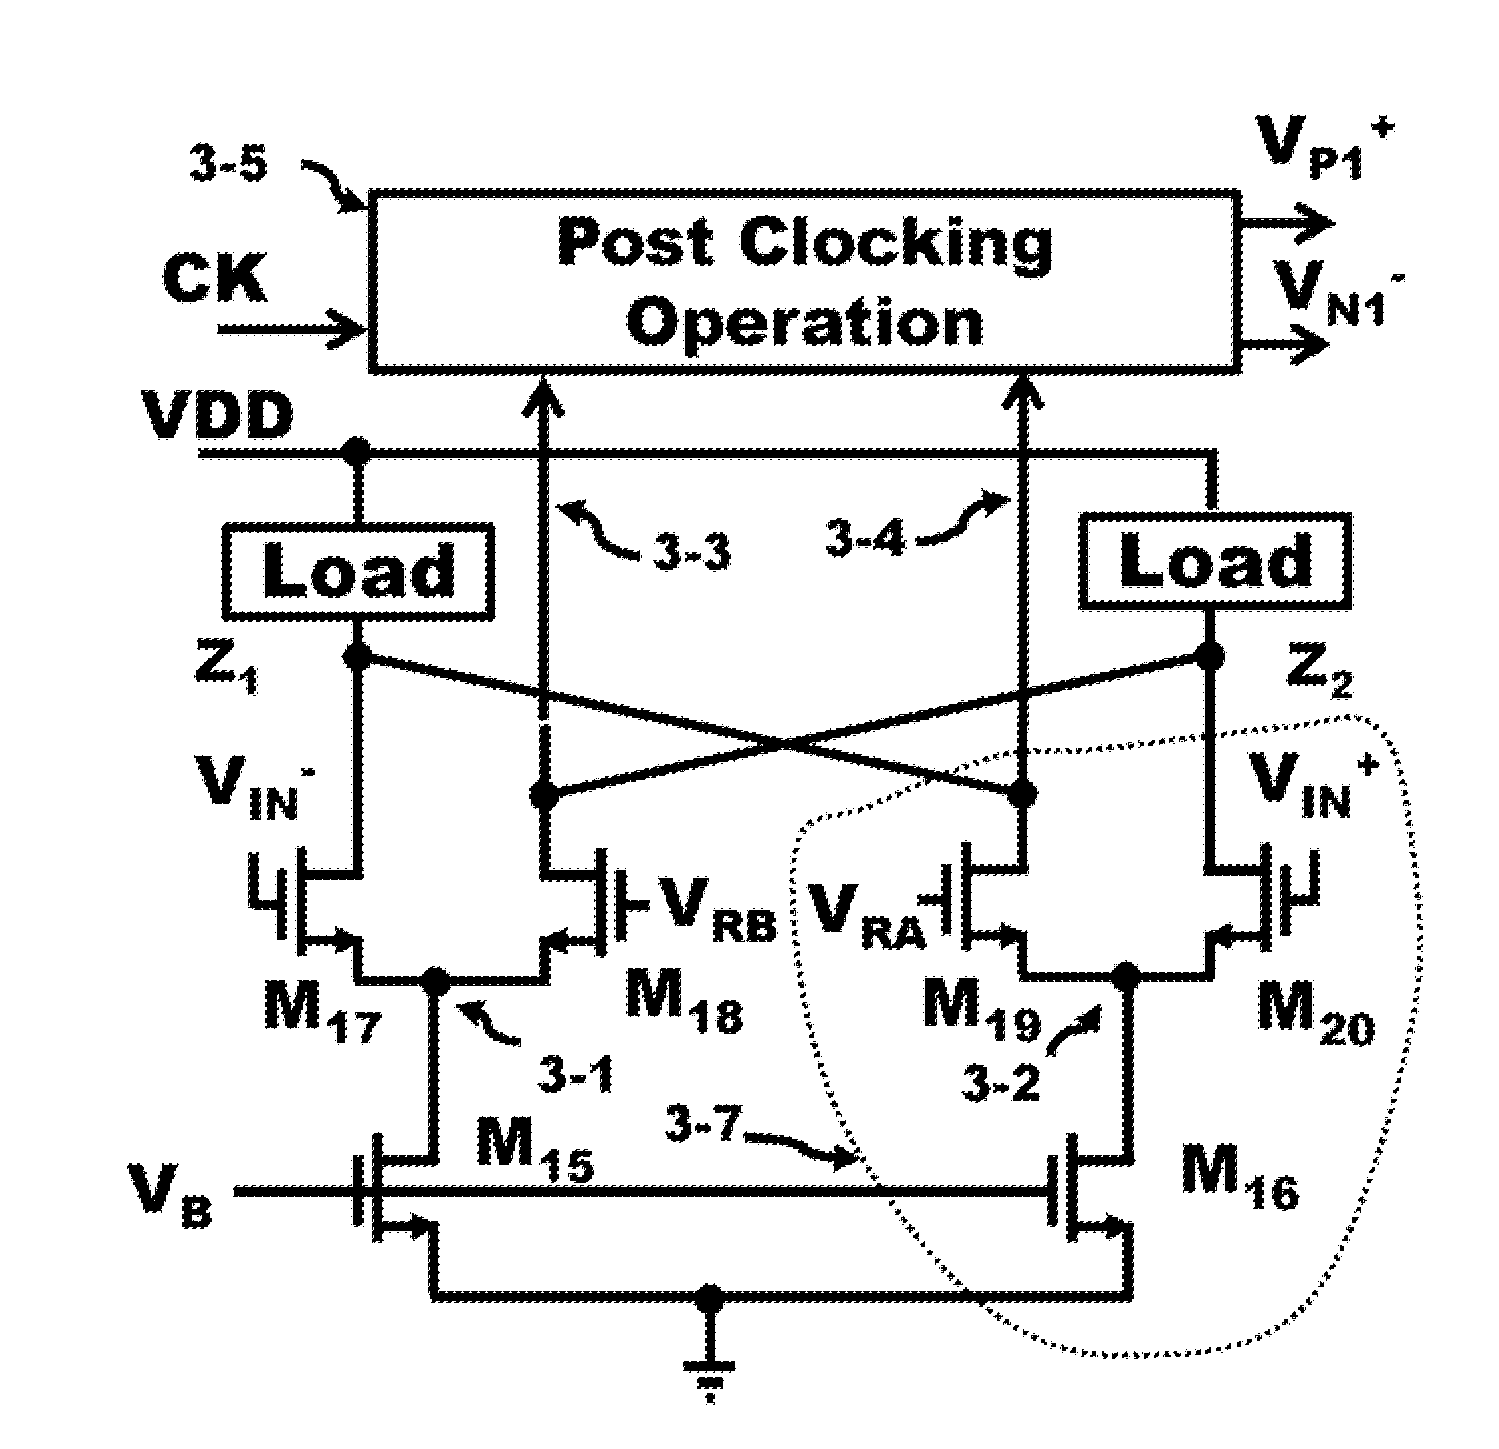 Method and Apparatus for Reducing the Clock Kick-Back of ADC Comparators While Maintaining Transistor Matching Behavior